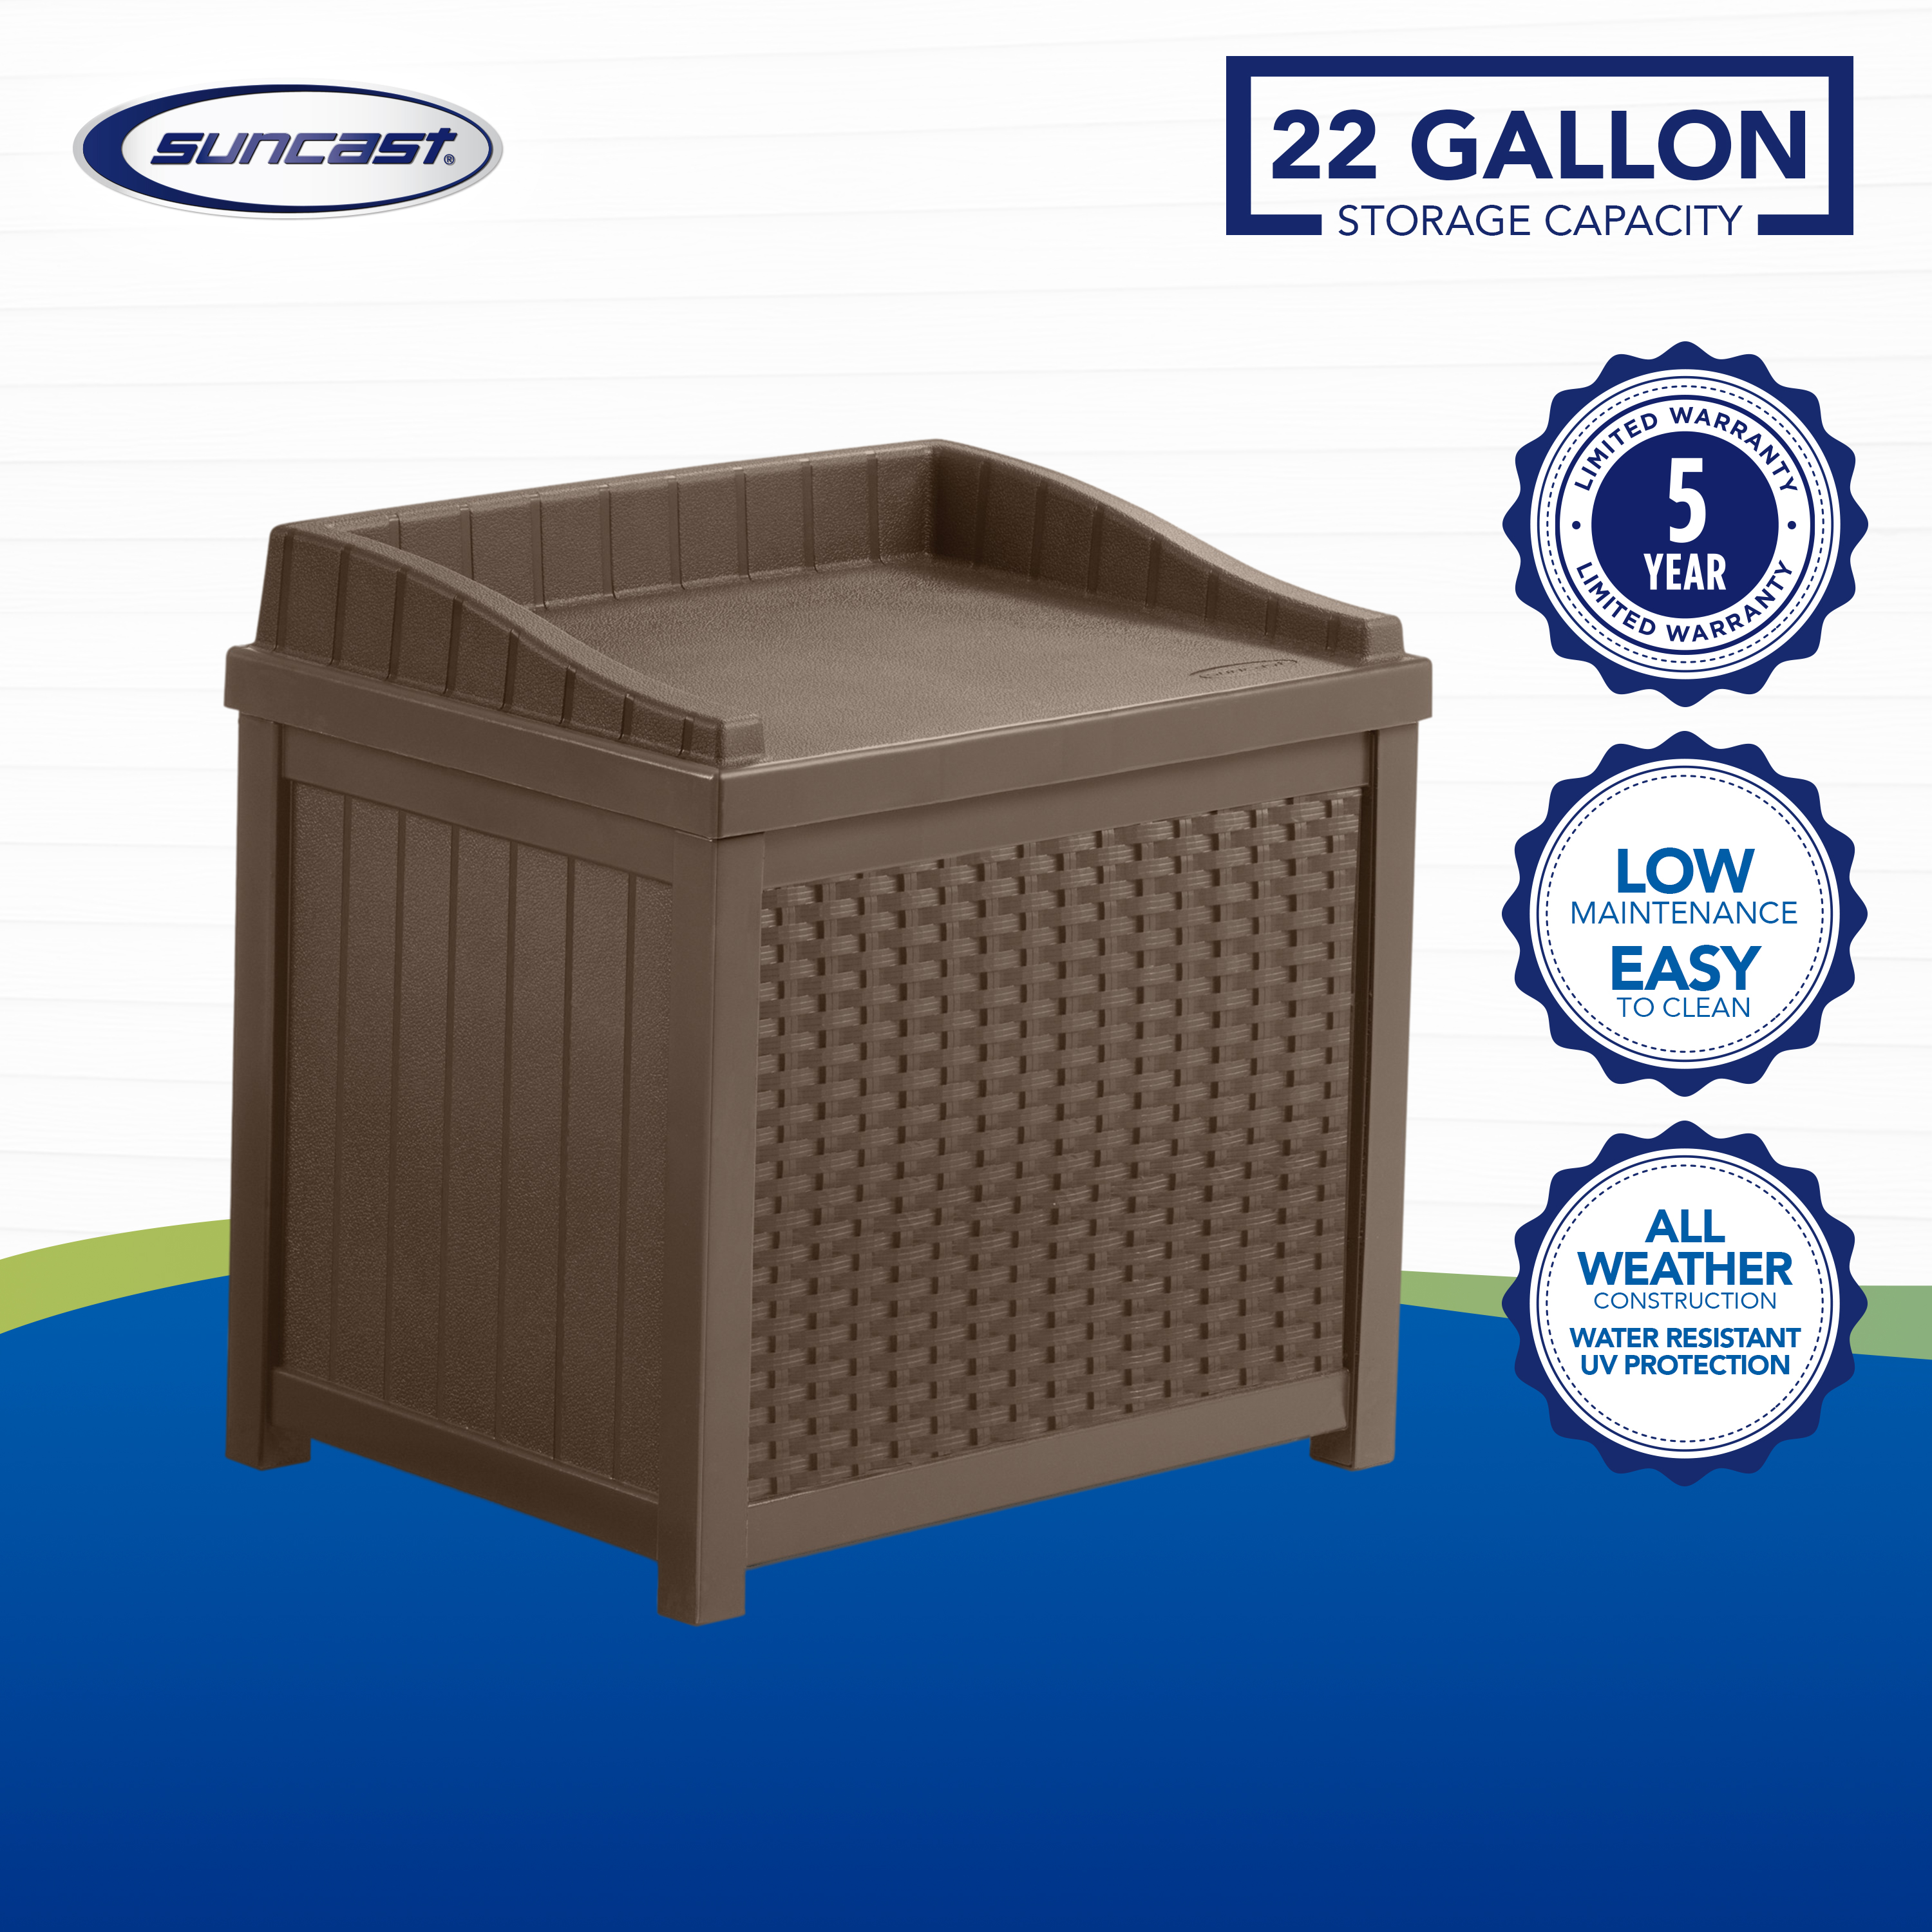 Suncast Outdoor 22 Gallon Resin and Wicker Deck Box with Seat, Java Brown - image 2 of 9